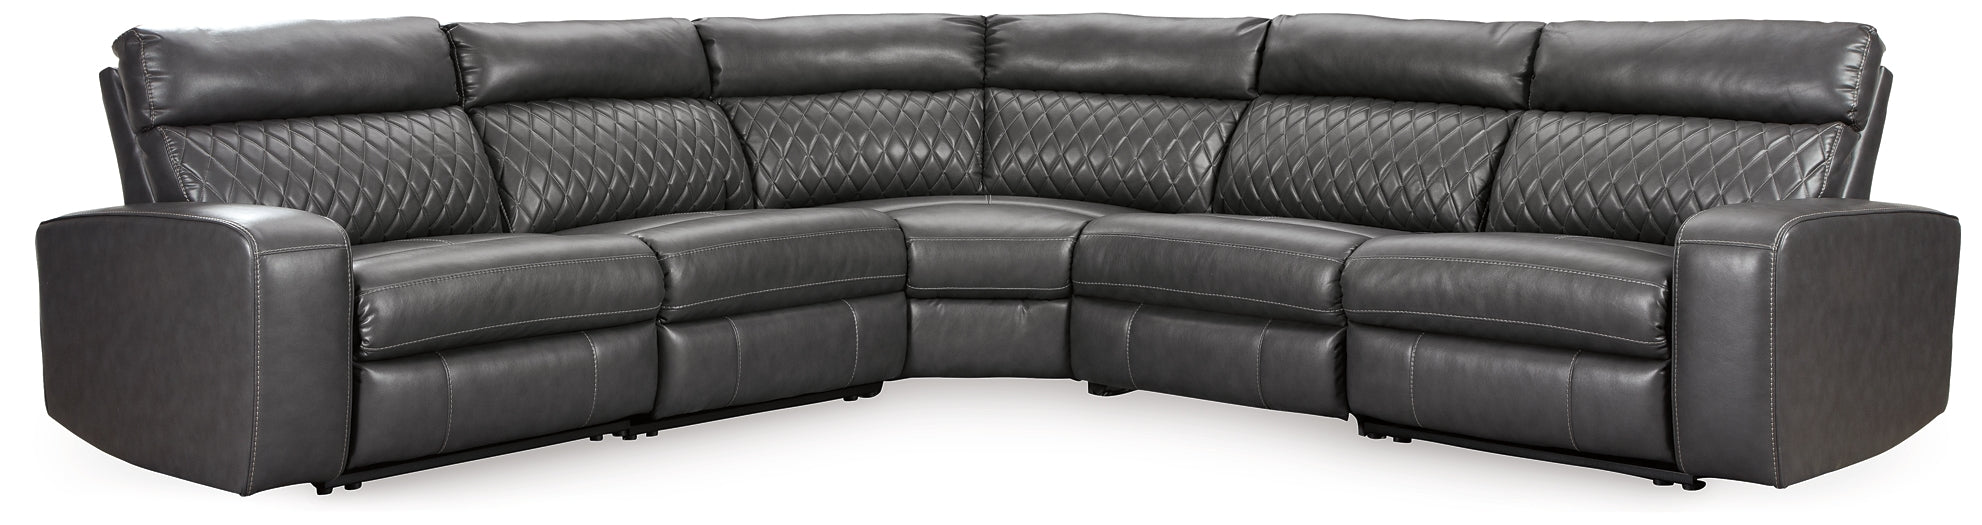 Samperstone 5-Piece Power Reclining Sectional